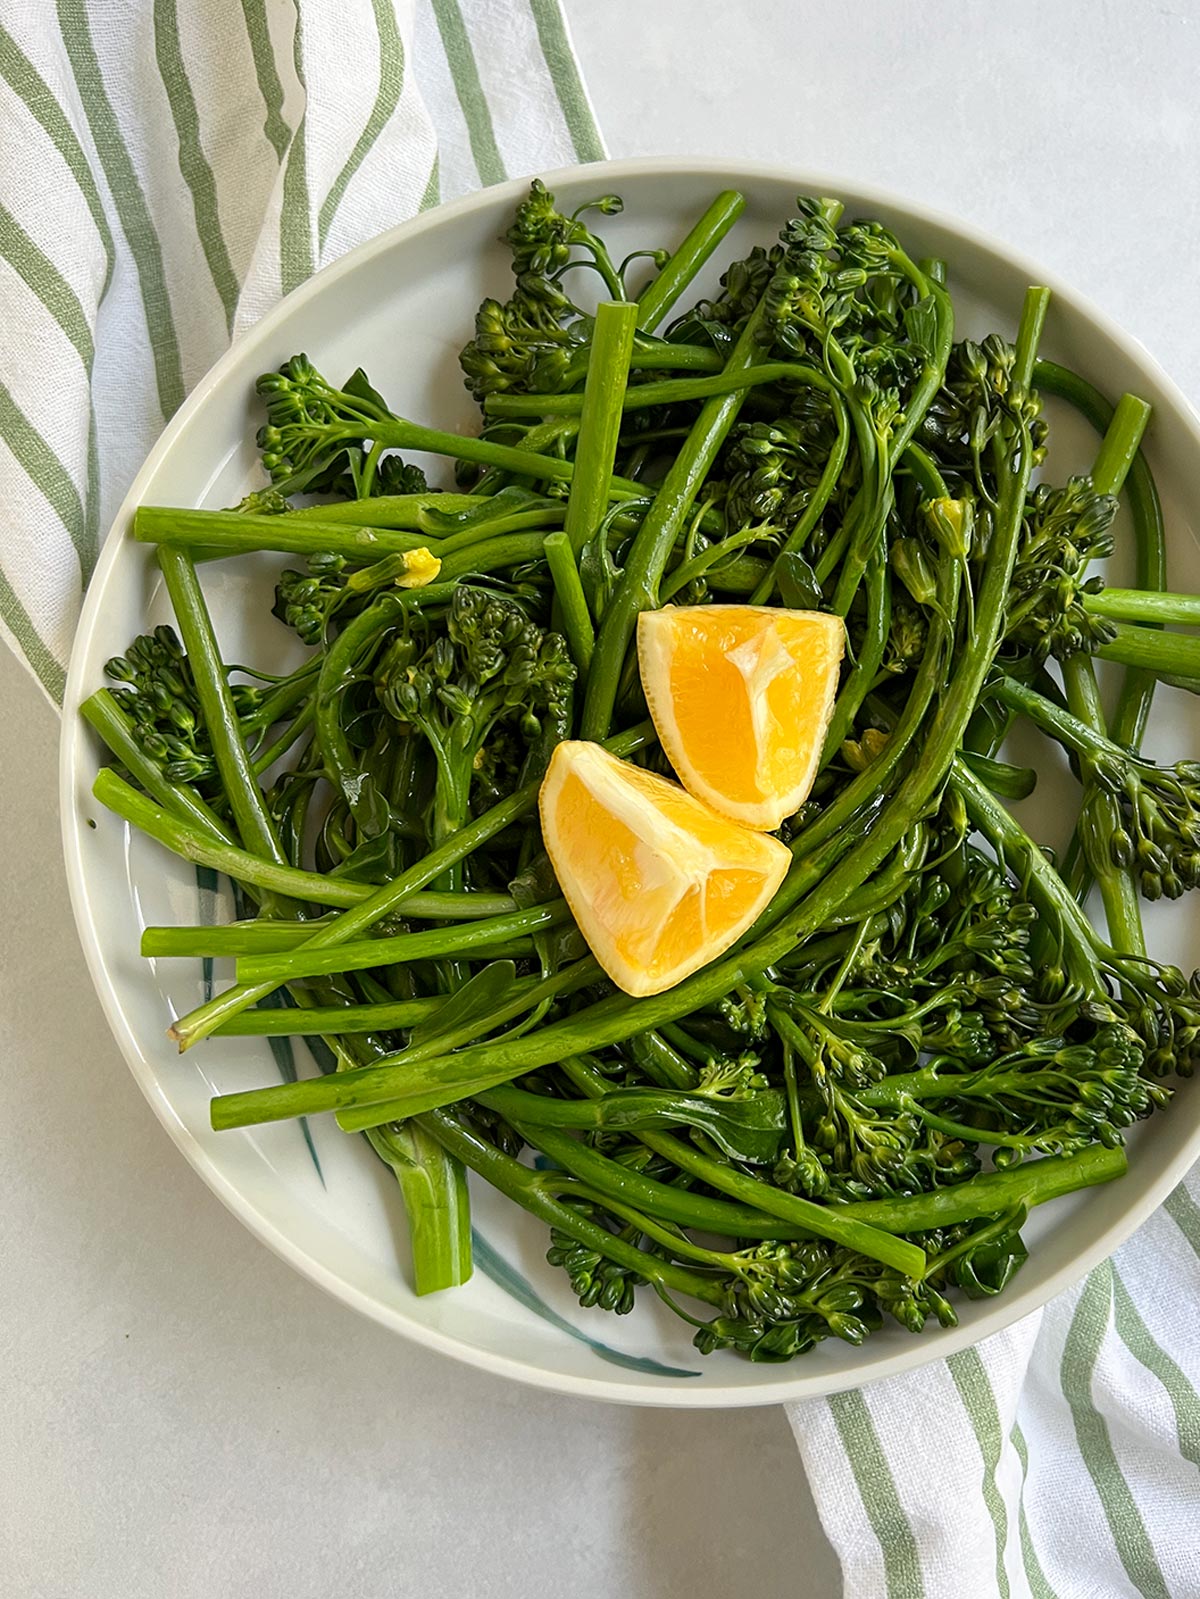 Braised broccolini on a plate with 2 pieces of lemon on top and a striped napkin underneath.